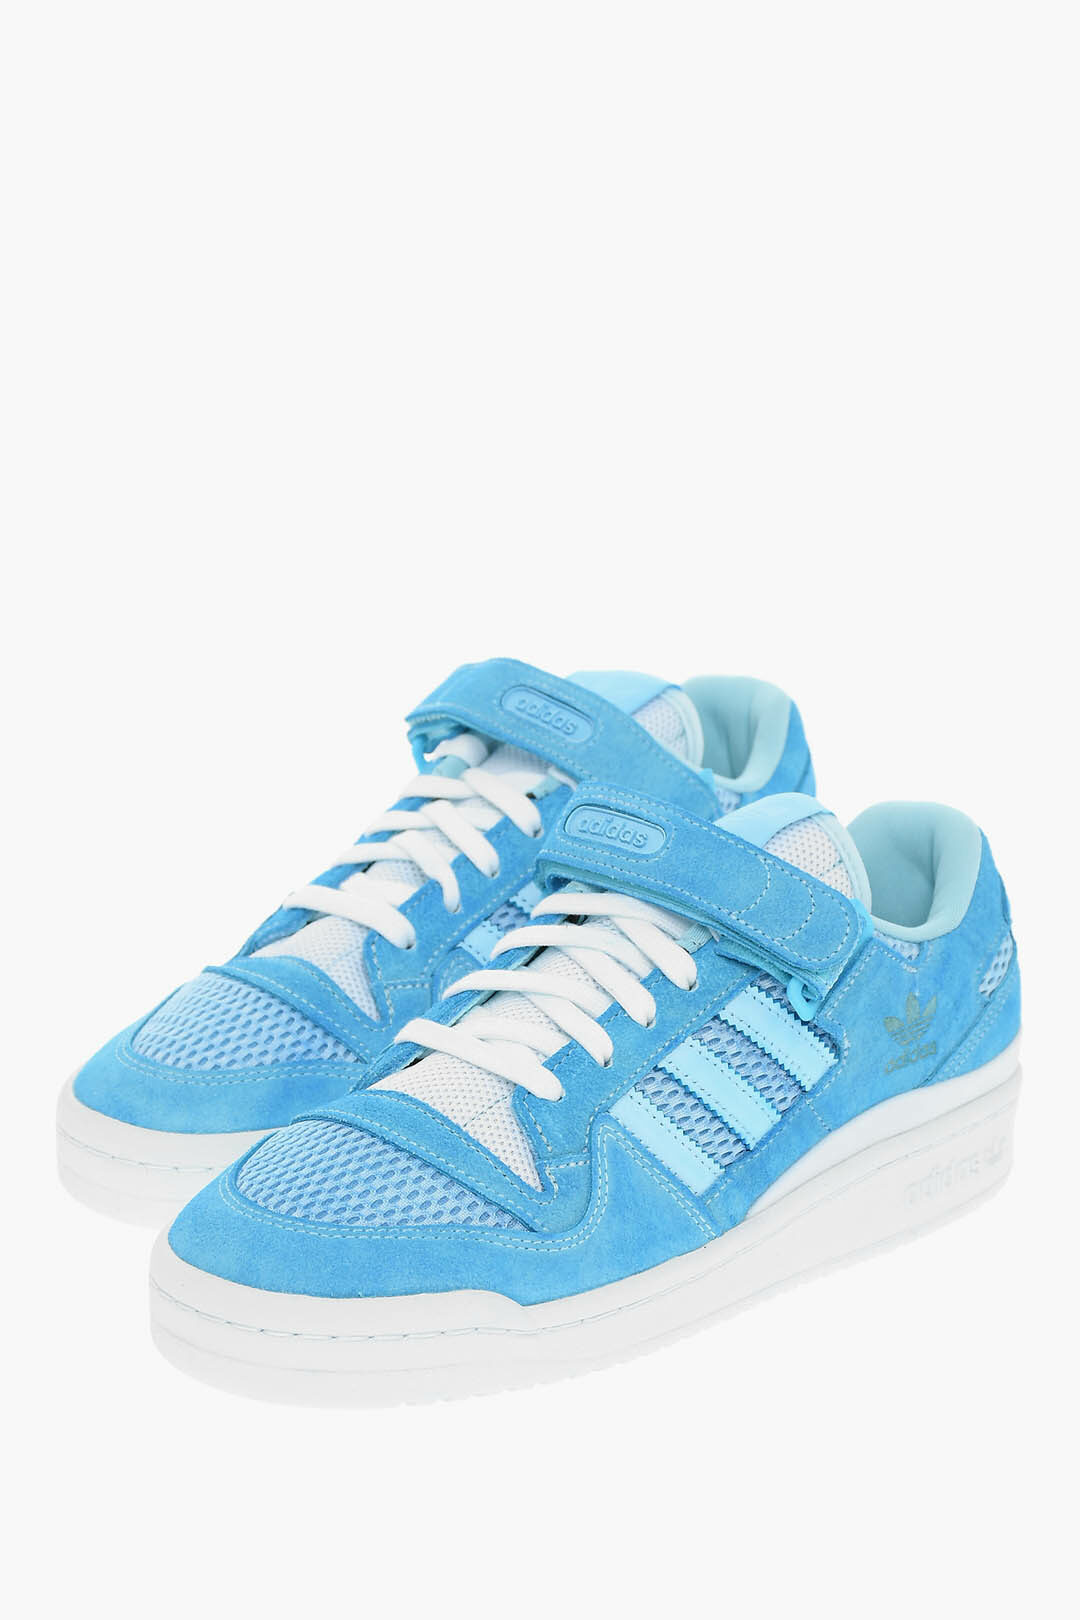 Adidas Suede Leather FORUM 84 Low-Top Sneakers men - Outlet